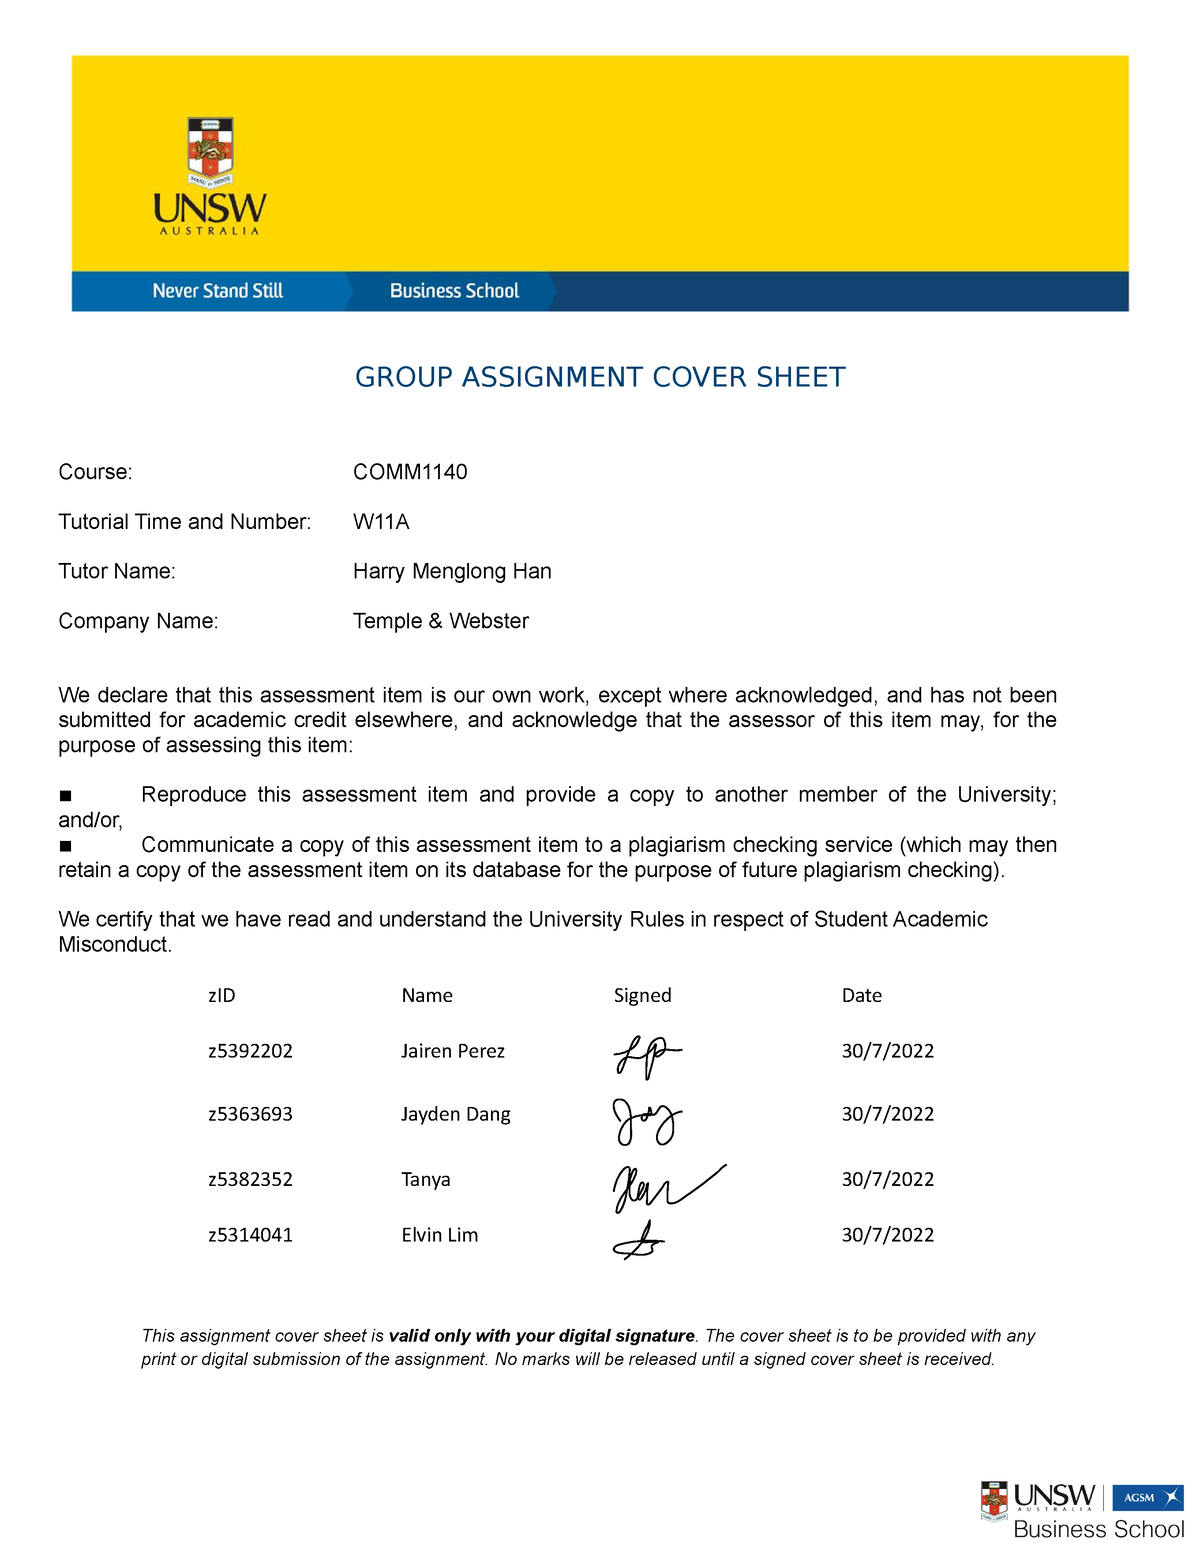 usyd group assignment cover sheet